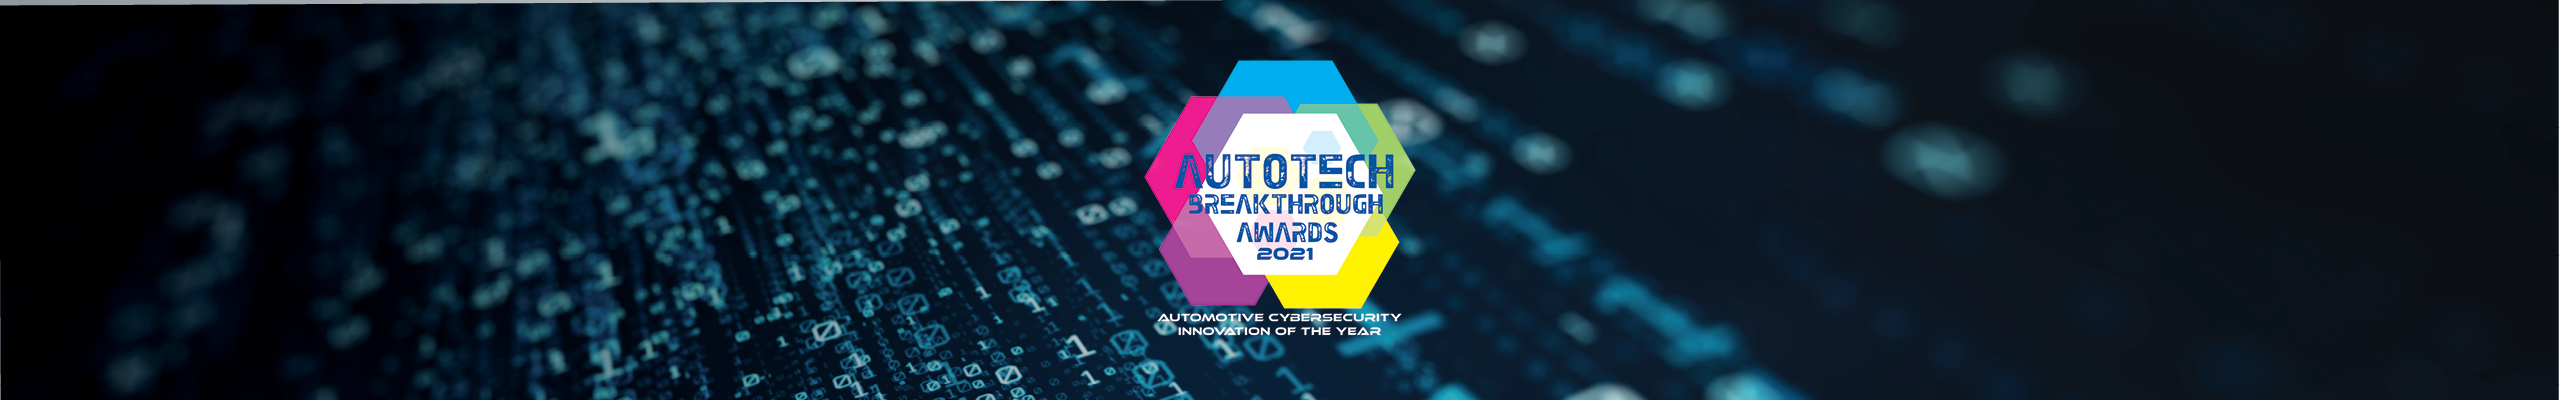 Argus Wins Automotive Cyber Security Innovation of the Year Award for its Outstanding, Industry-First Penetration Testing Technology